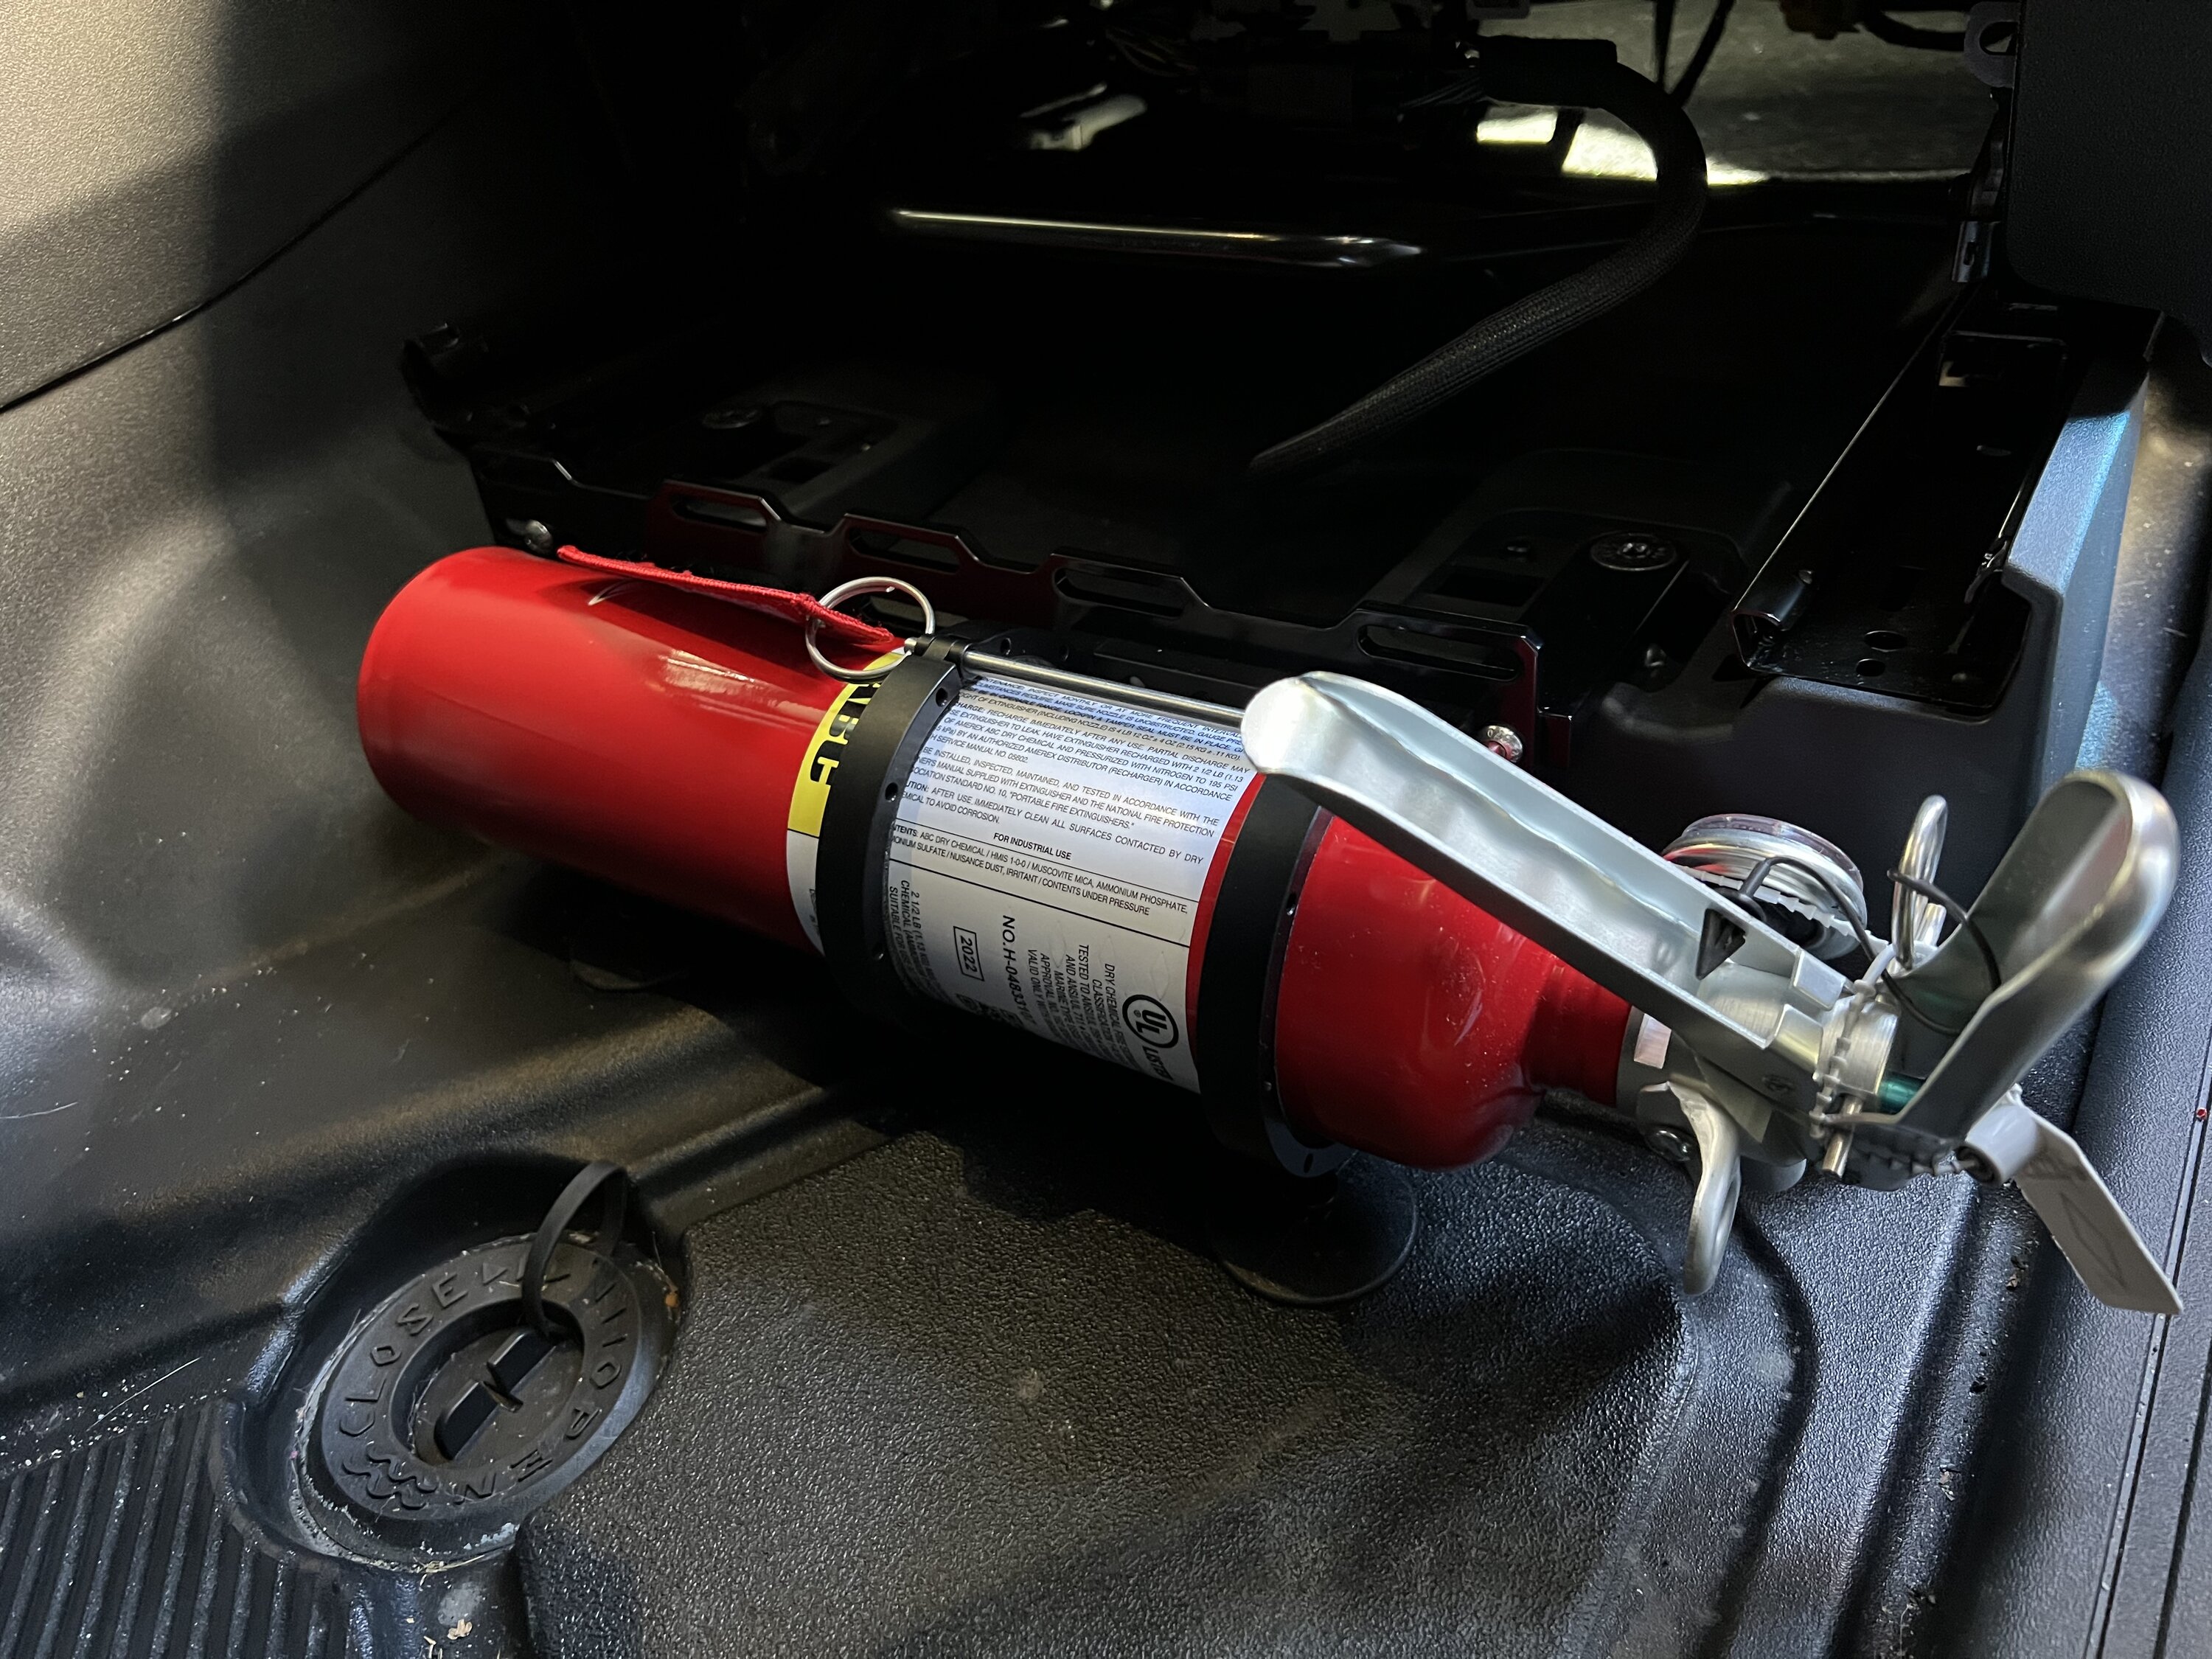 Ford Bronco Fire Extinguisher Mounting in the Bronco - Show Your Installs D880144D-7A37-4580-8B4A-49596FC1EB31